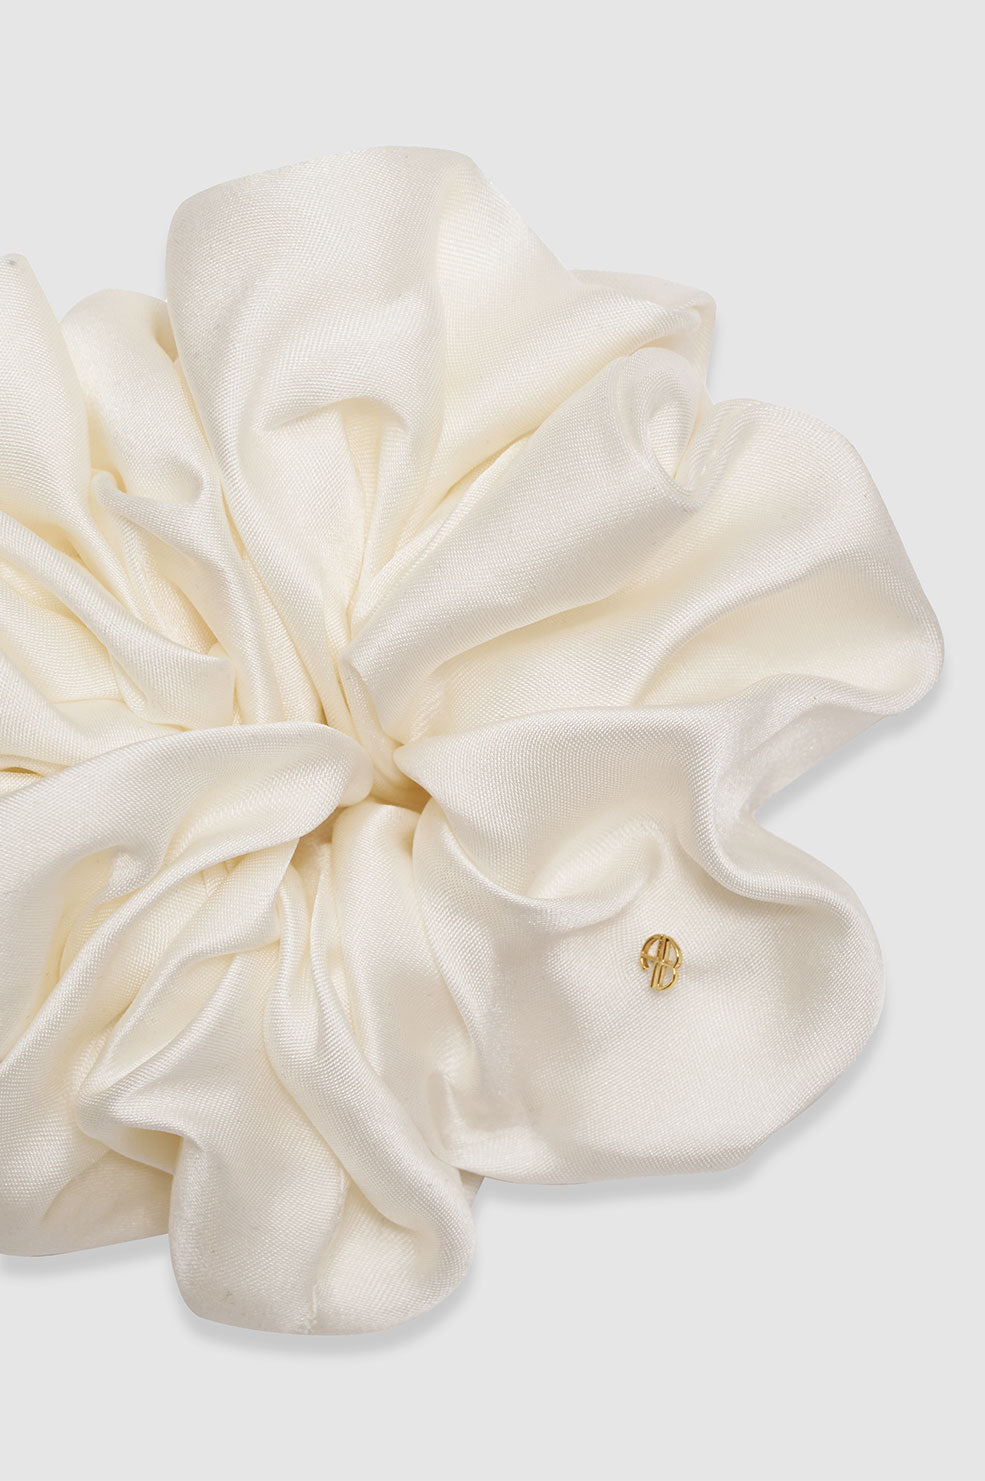 ANINE BING Pearl Scrunchie 2 Pack - Ivory And Black - White Scrunchie View